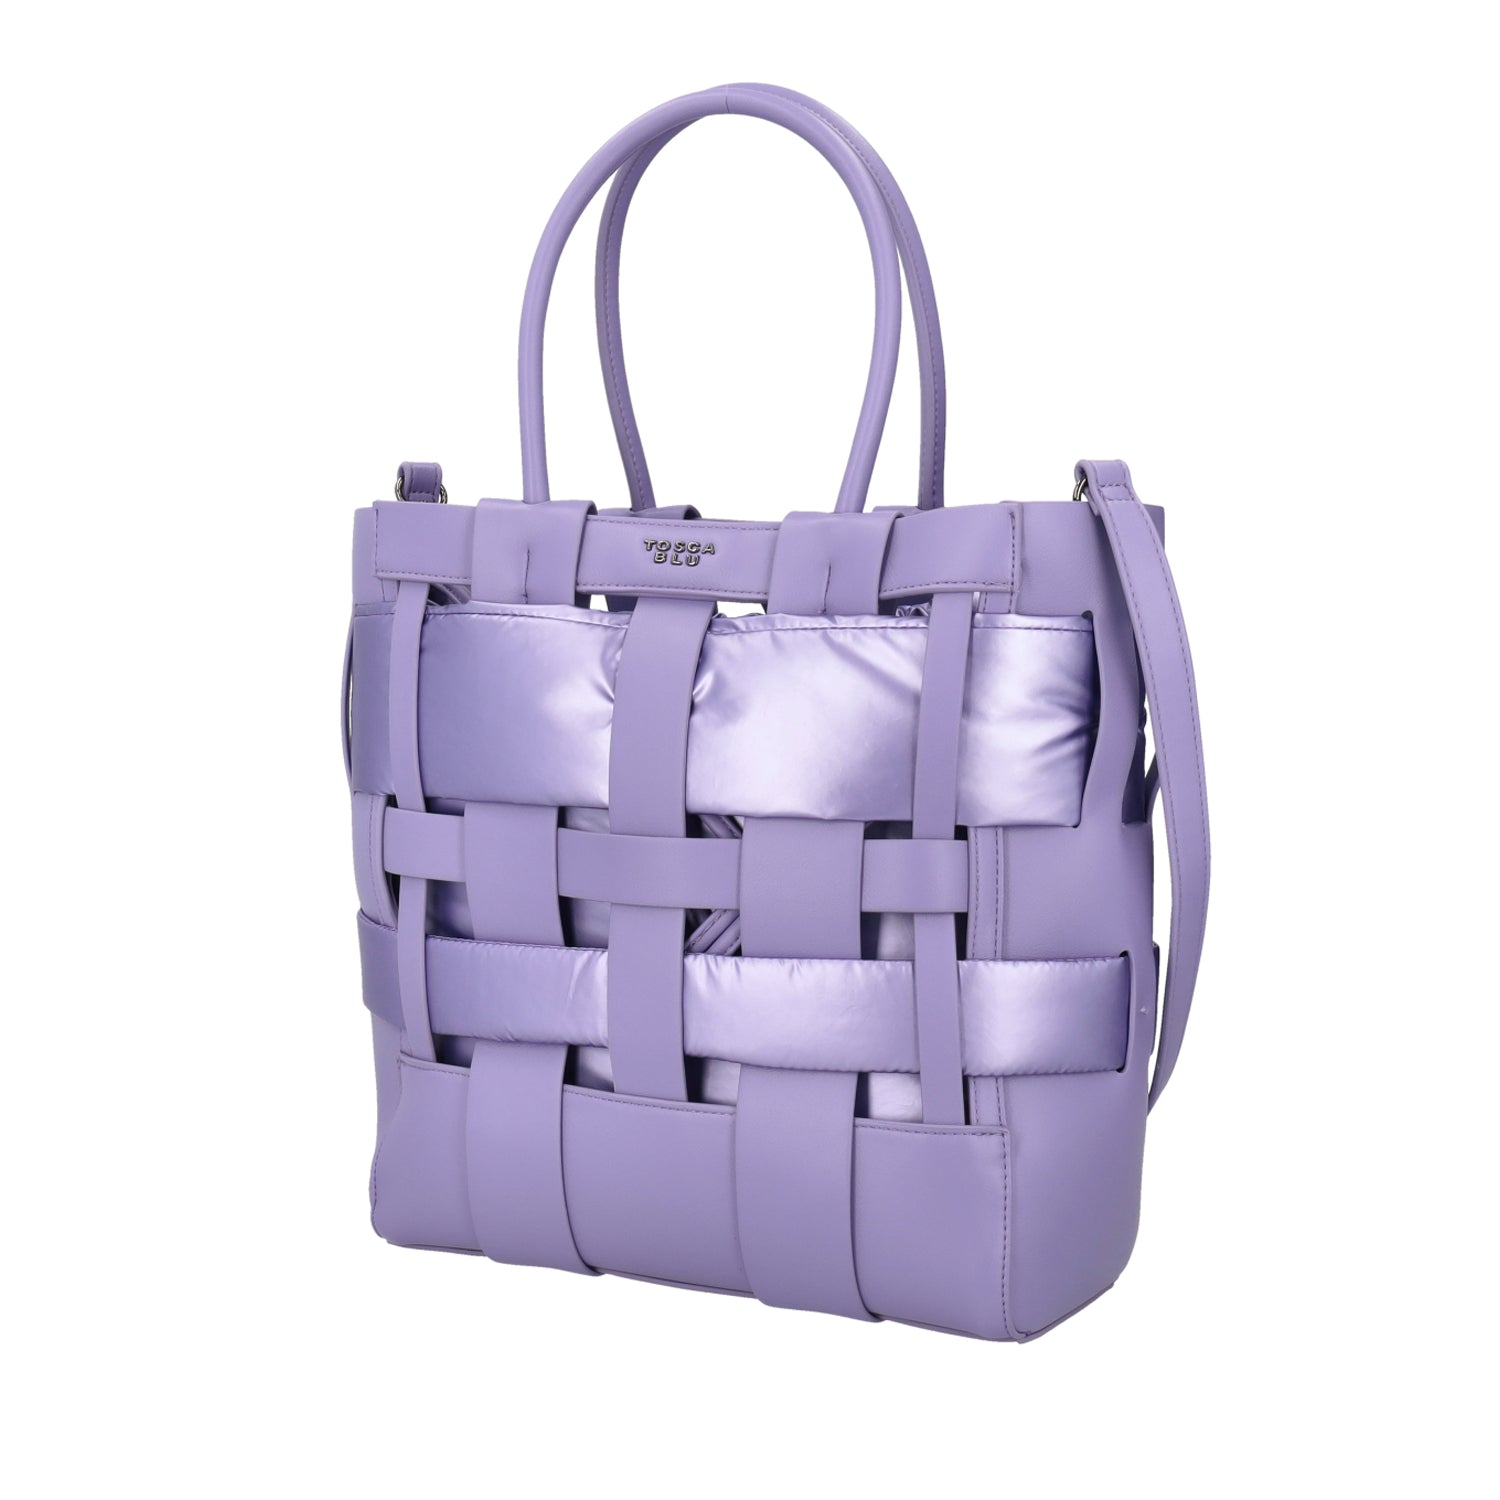 “PAN DI SPAGNA” SHOPPING BAG IN VIOLET WITH A SHOULDER STRAP | Tosca Blu